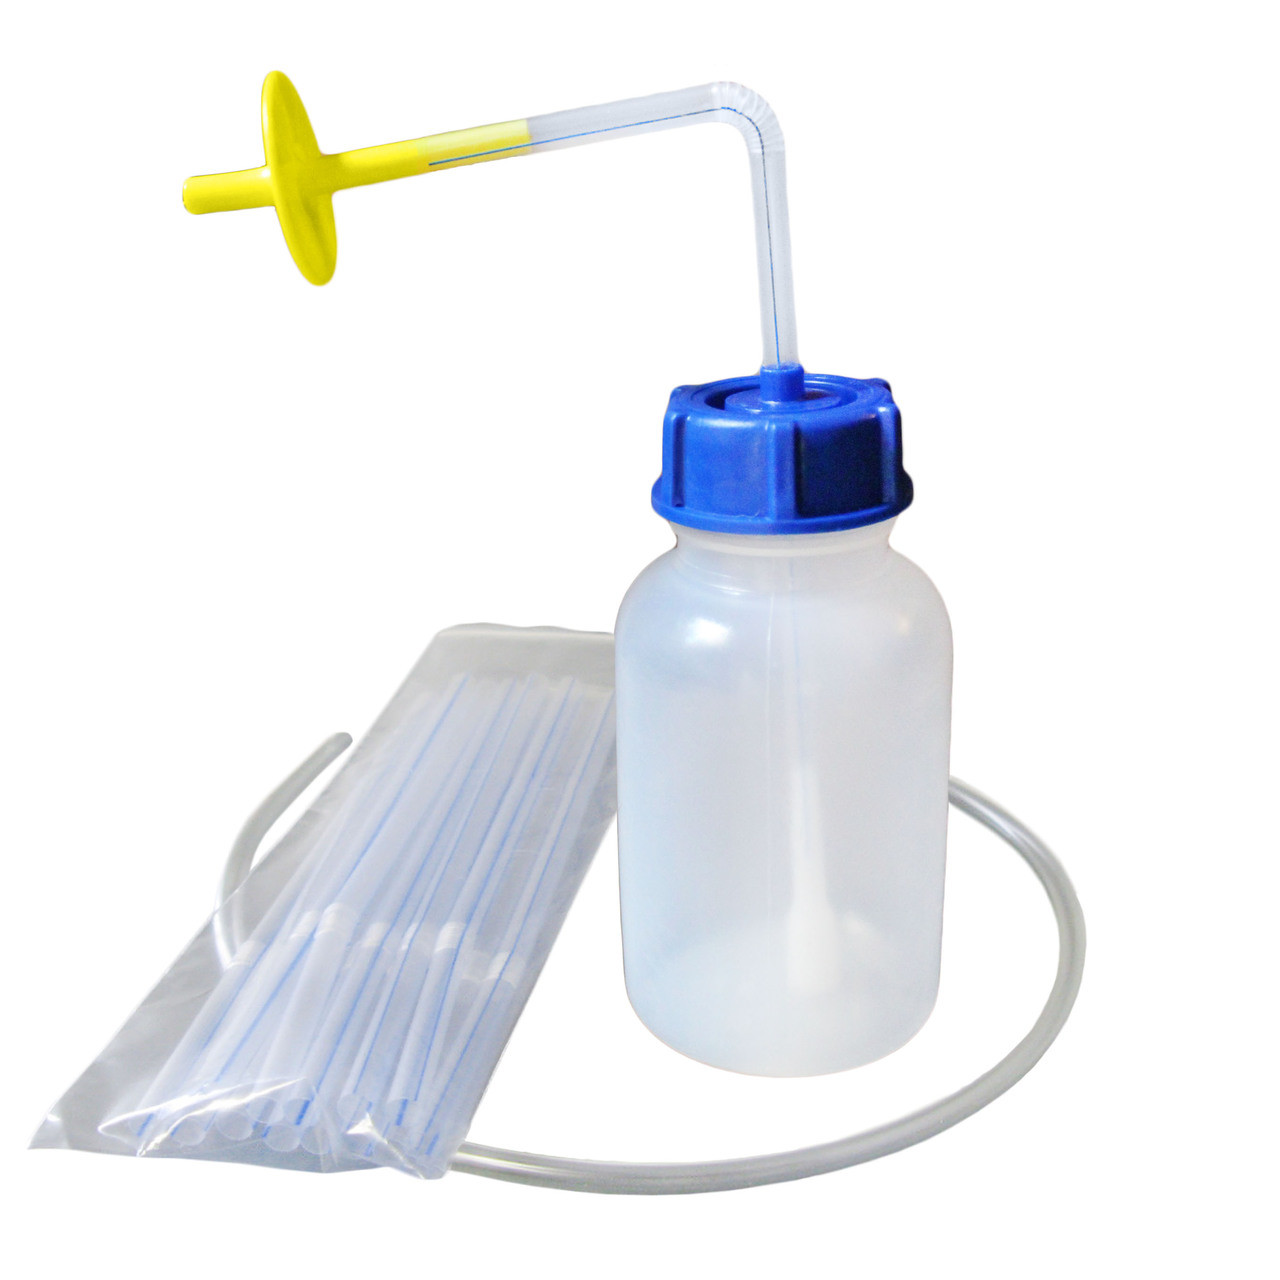 ARK's Bear Bottle Kit to Teach Straw Drinking - Includes Unique Valve & Mouthpiece